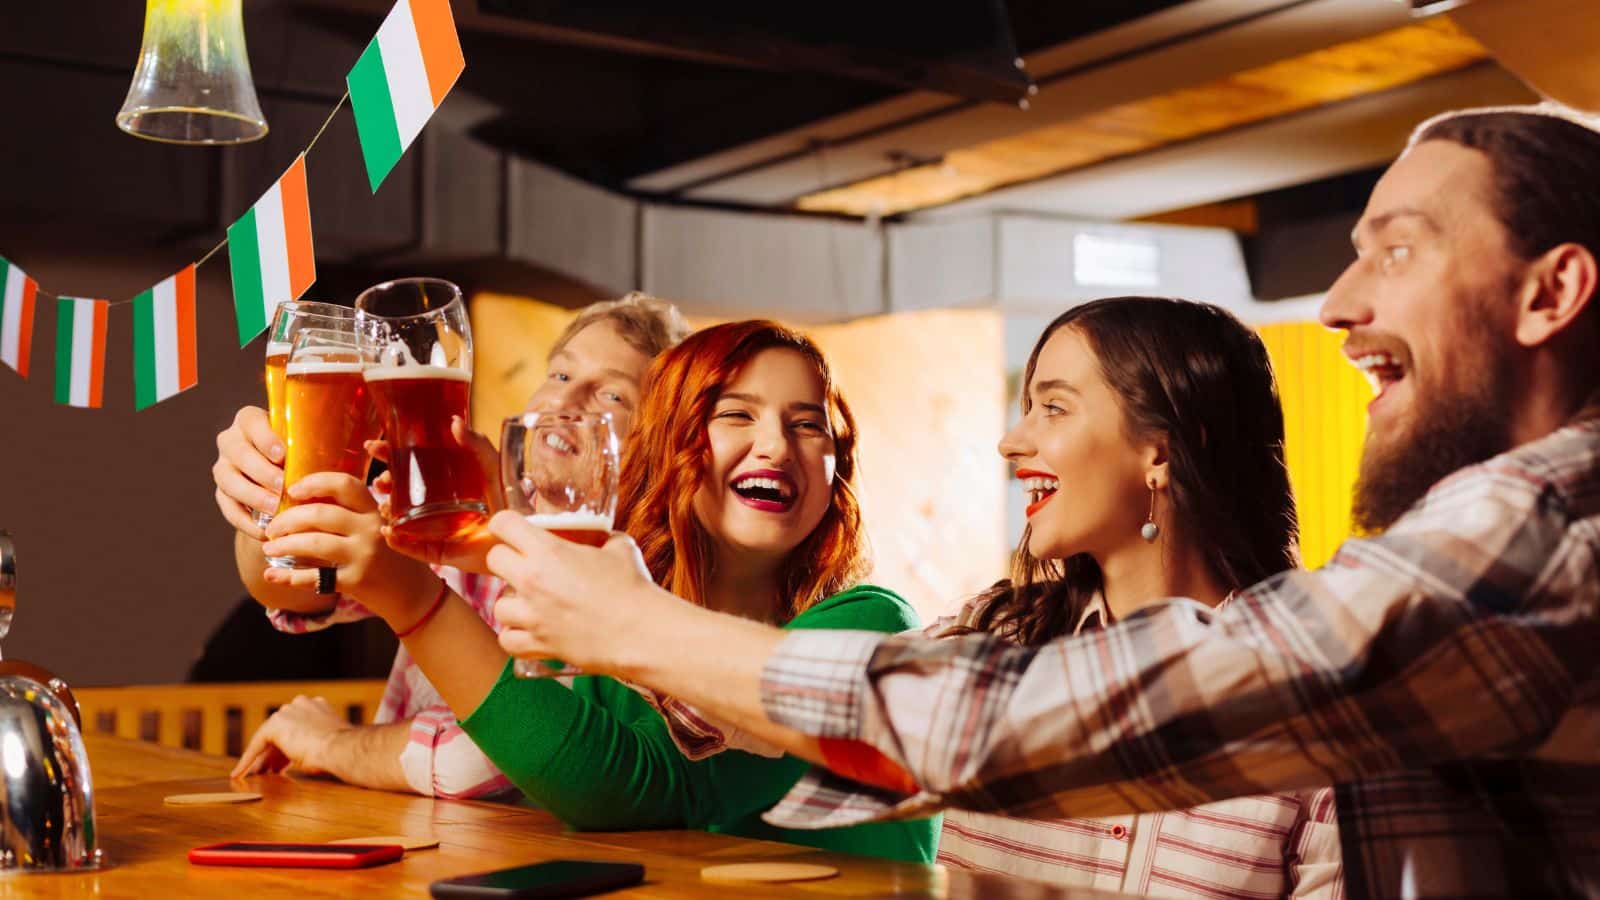 <p>Dancing, singing, and drinking are three things Irish people do incredibly well. So do yourself a favor and stop in at a bar or two on your Irish adventures – preferably one with live music playing.</p><p>If you’re lucky, you’ll be sitting sipping a Guinness or an Irish whiskey when a local pulls a fiddle out of nowhere and starts a singsong. Otherwise, whenever you get to a new place, keep an ear to the ground or ask around if any music is playing at the local watering hole.</p><p><strong>MORE ARTICLES LIKE THIS COMING UP:</strong></p>